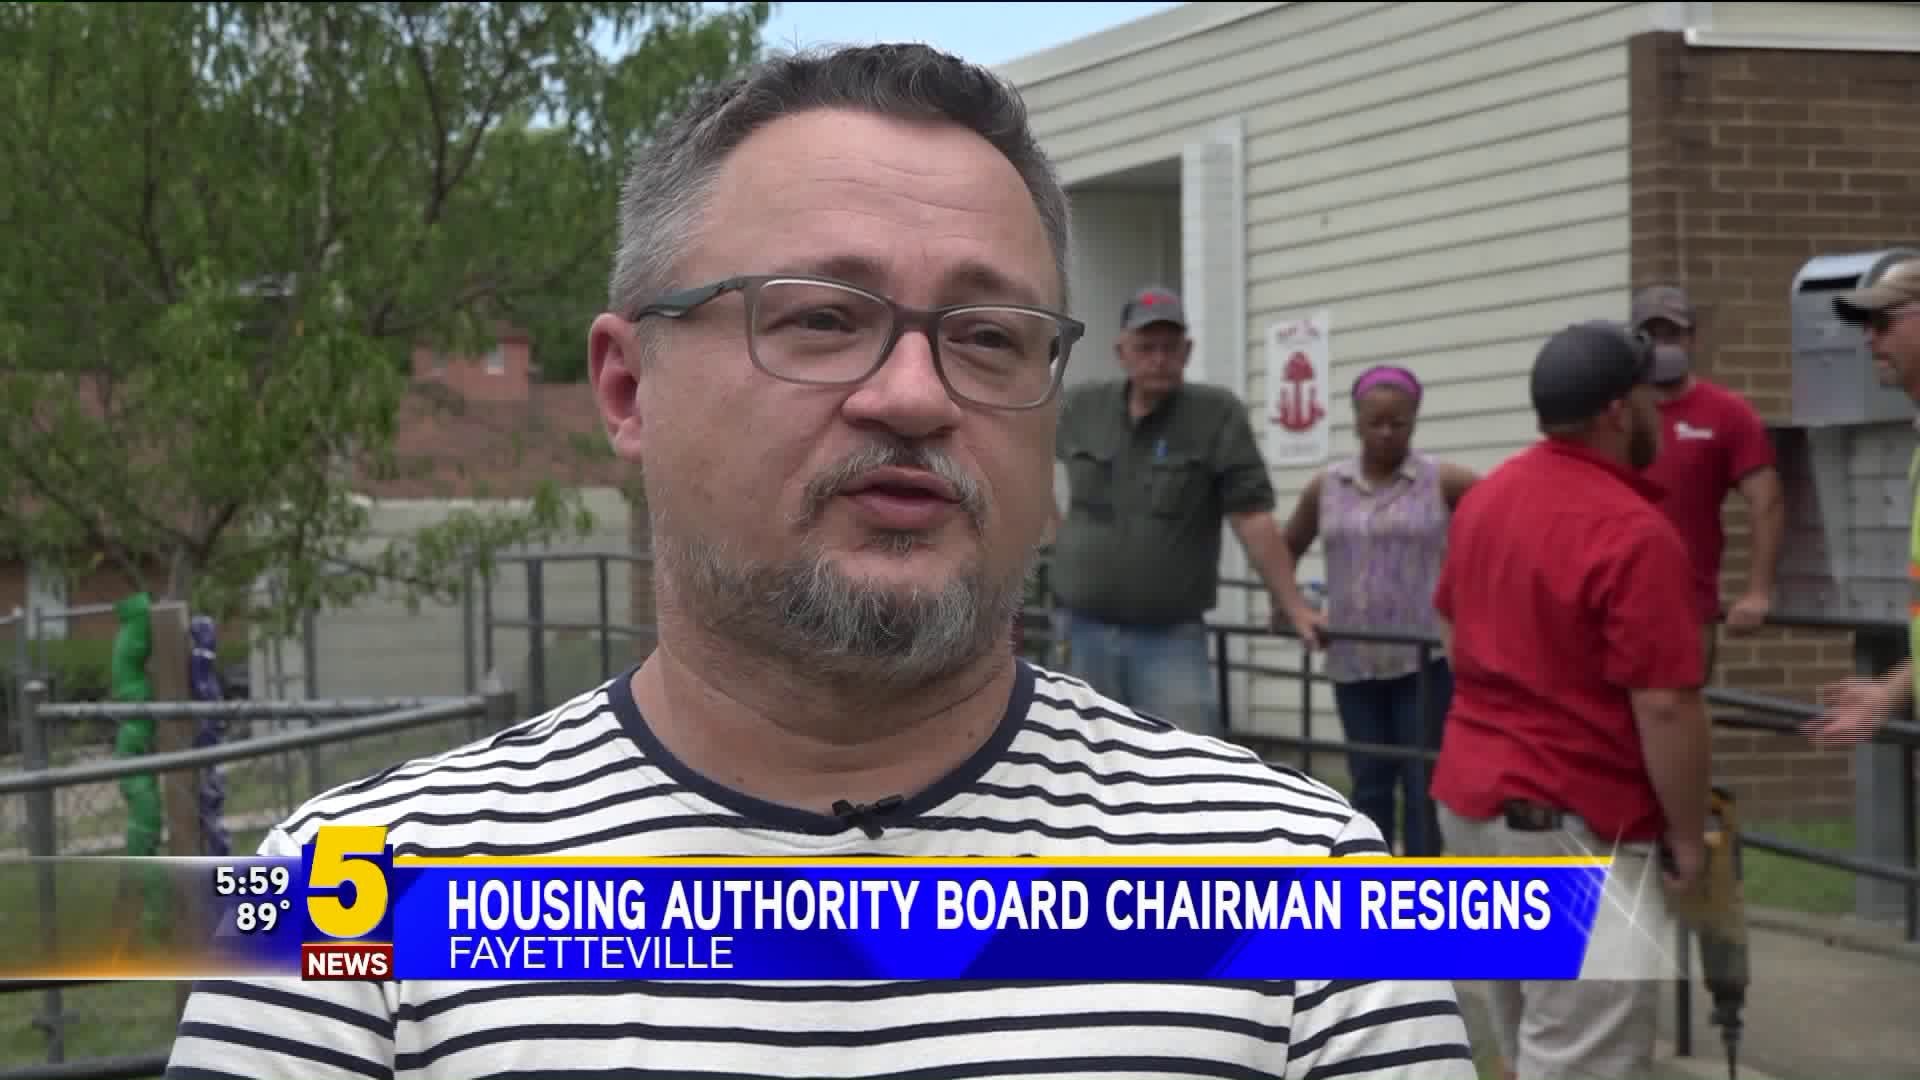 Fayetteville Housing Authority Chairman Resigns